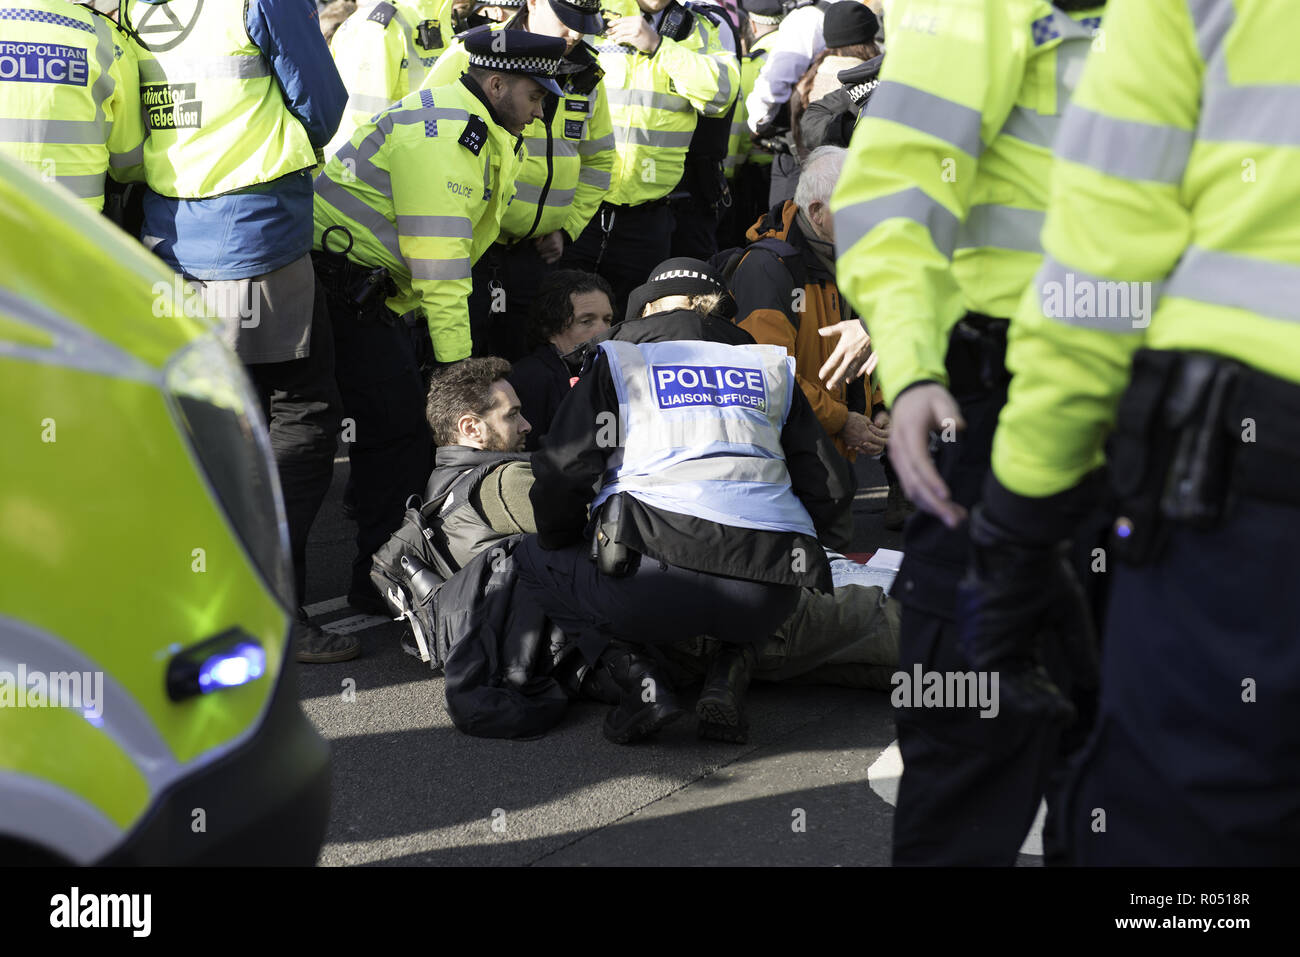 London, Greater London, UK. 31st Oct, 2018. Police officers are seen holding an activist who was lying from the road during the protest.The newly formed Extinction Rebellion group, concerned about climate change, calls for a peaceful mass civil disobedience to highlight politicians' lack of commitment and action regarding environmental issues. Activists gathered at the Parliament Square and blocked the road for two hour. The protest included speakers such as Greta Thunberg, Caroline Lucas, and George Monbiot. According to Extinction Rebellion 15 people were arrested in the p Stock Photo